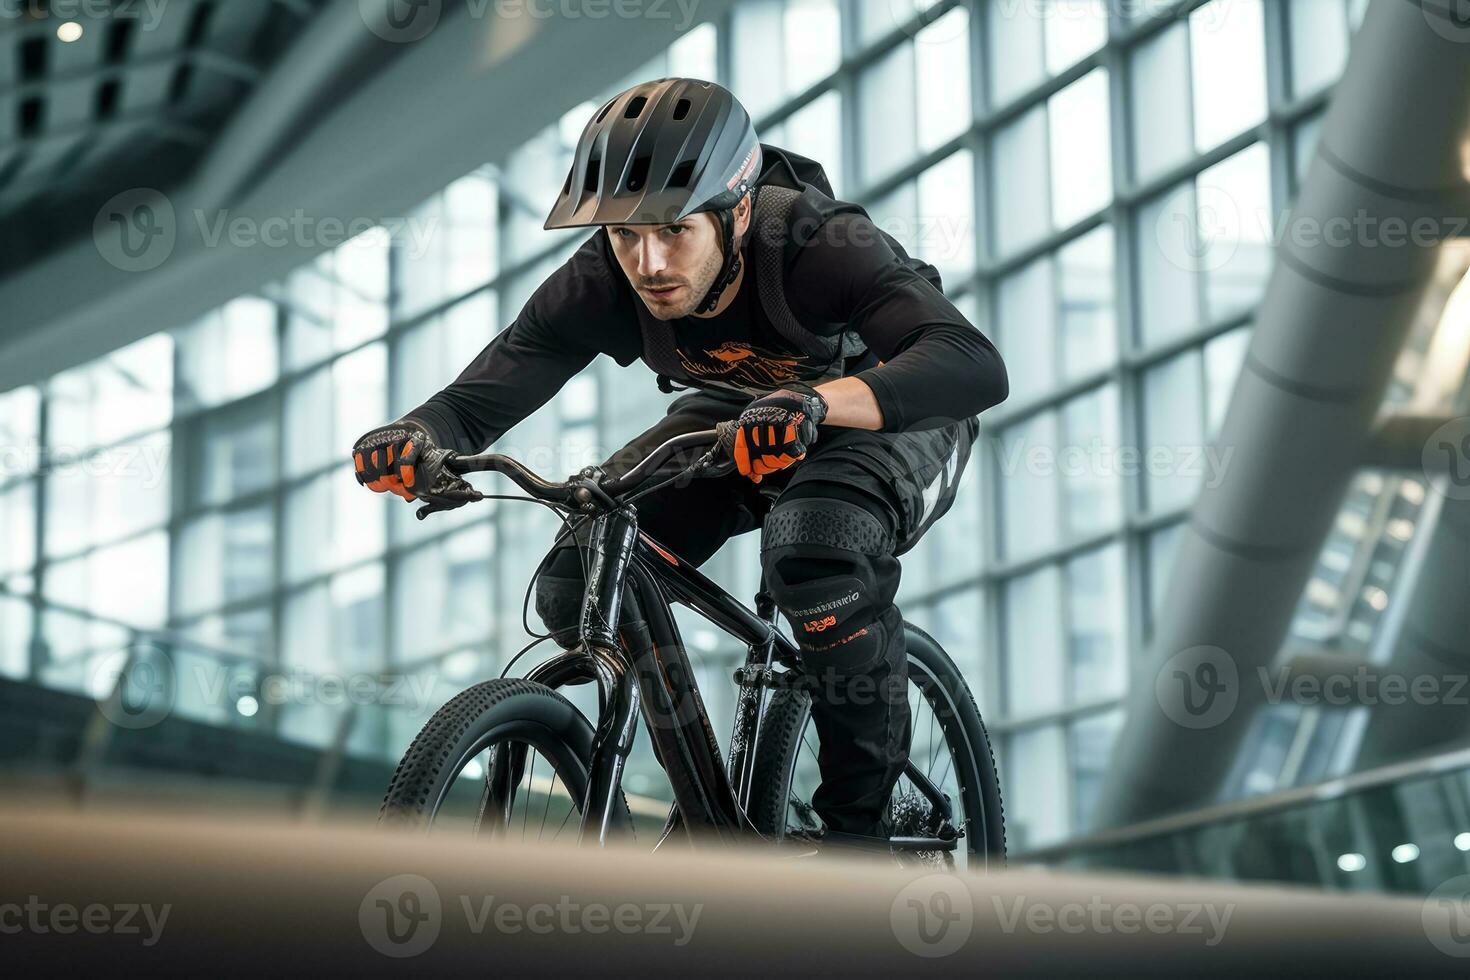 Intense BMX Rider Grinding Rail with Determination at Skatepark - Action Sports Shot - AI generated photo